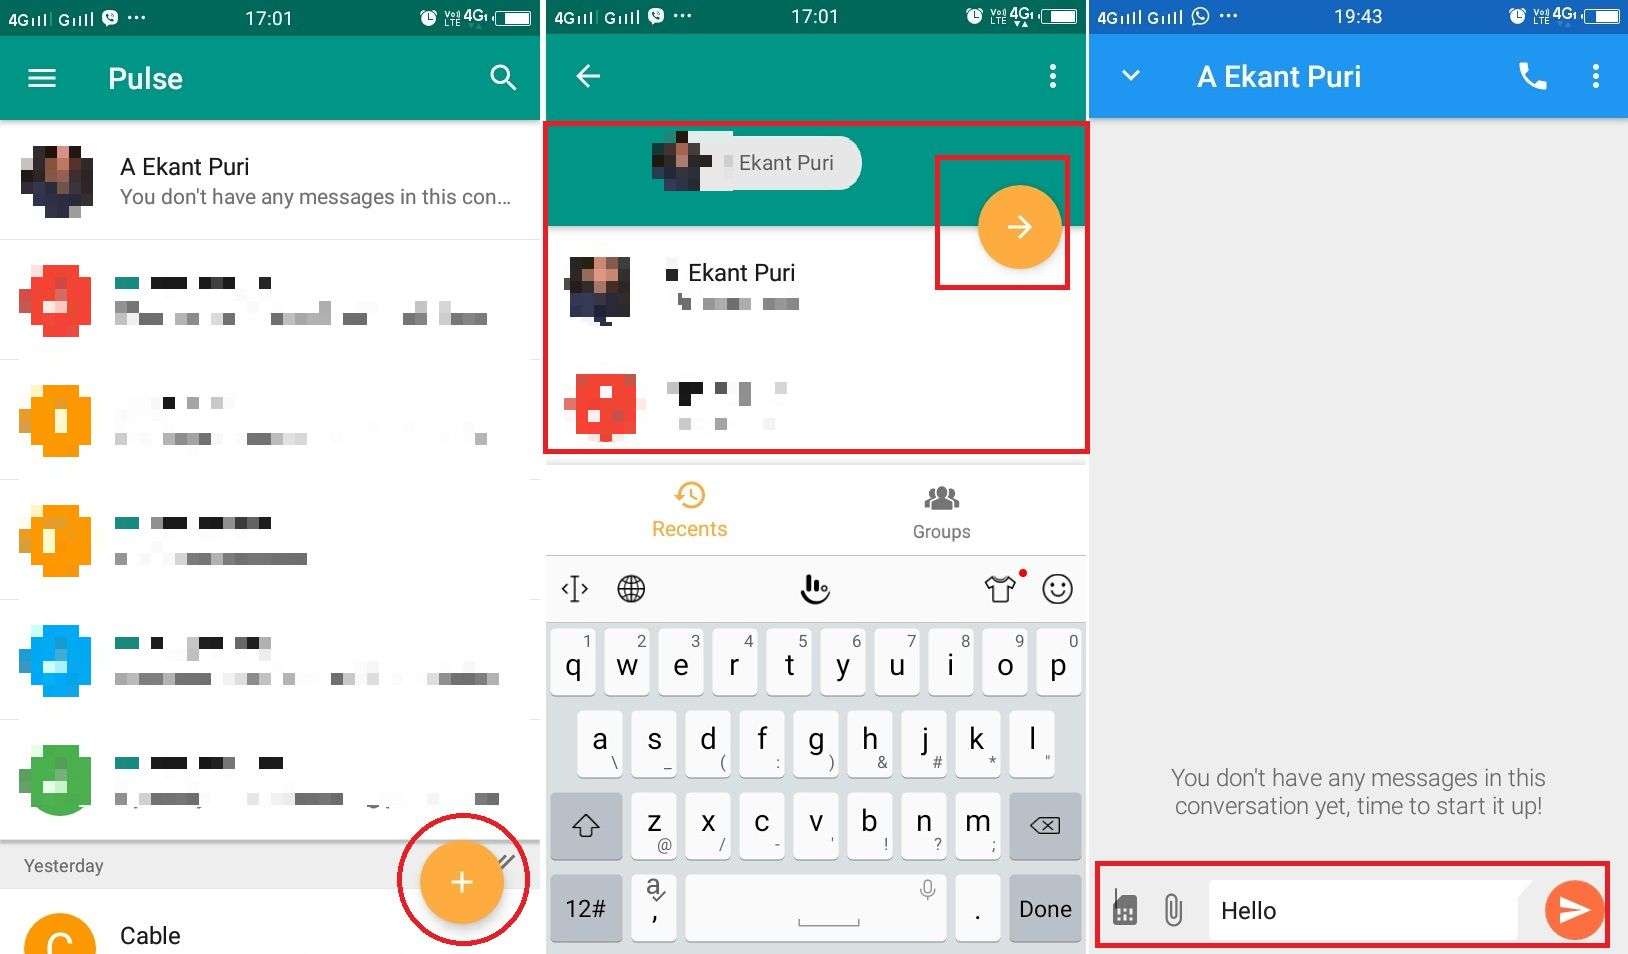 How to Schedule Text Messages Android using Pulse SMS